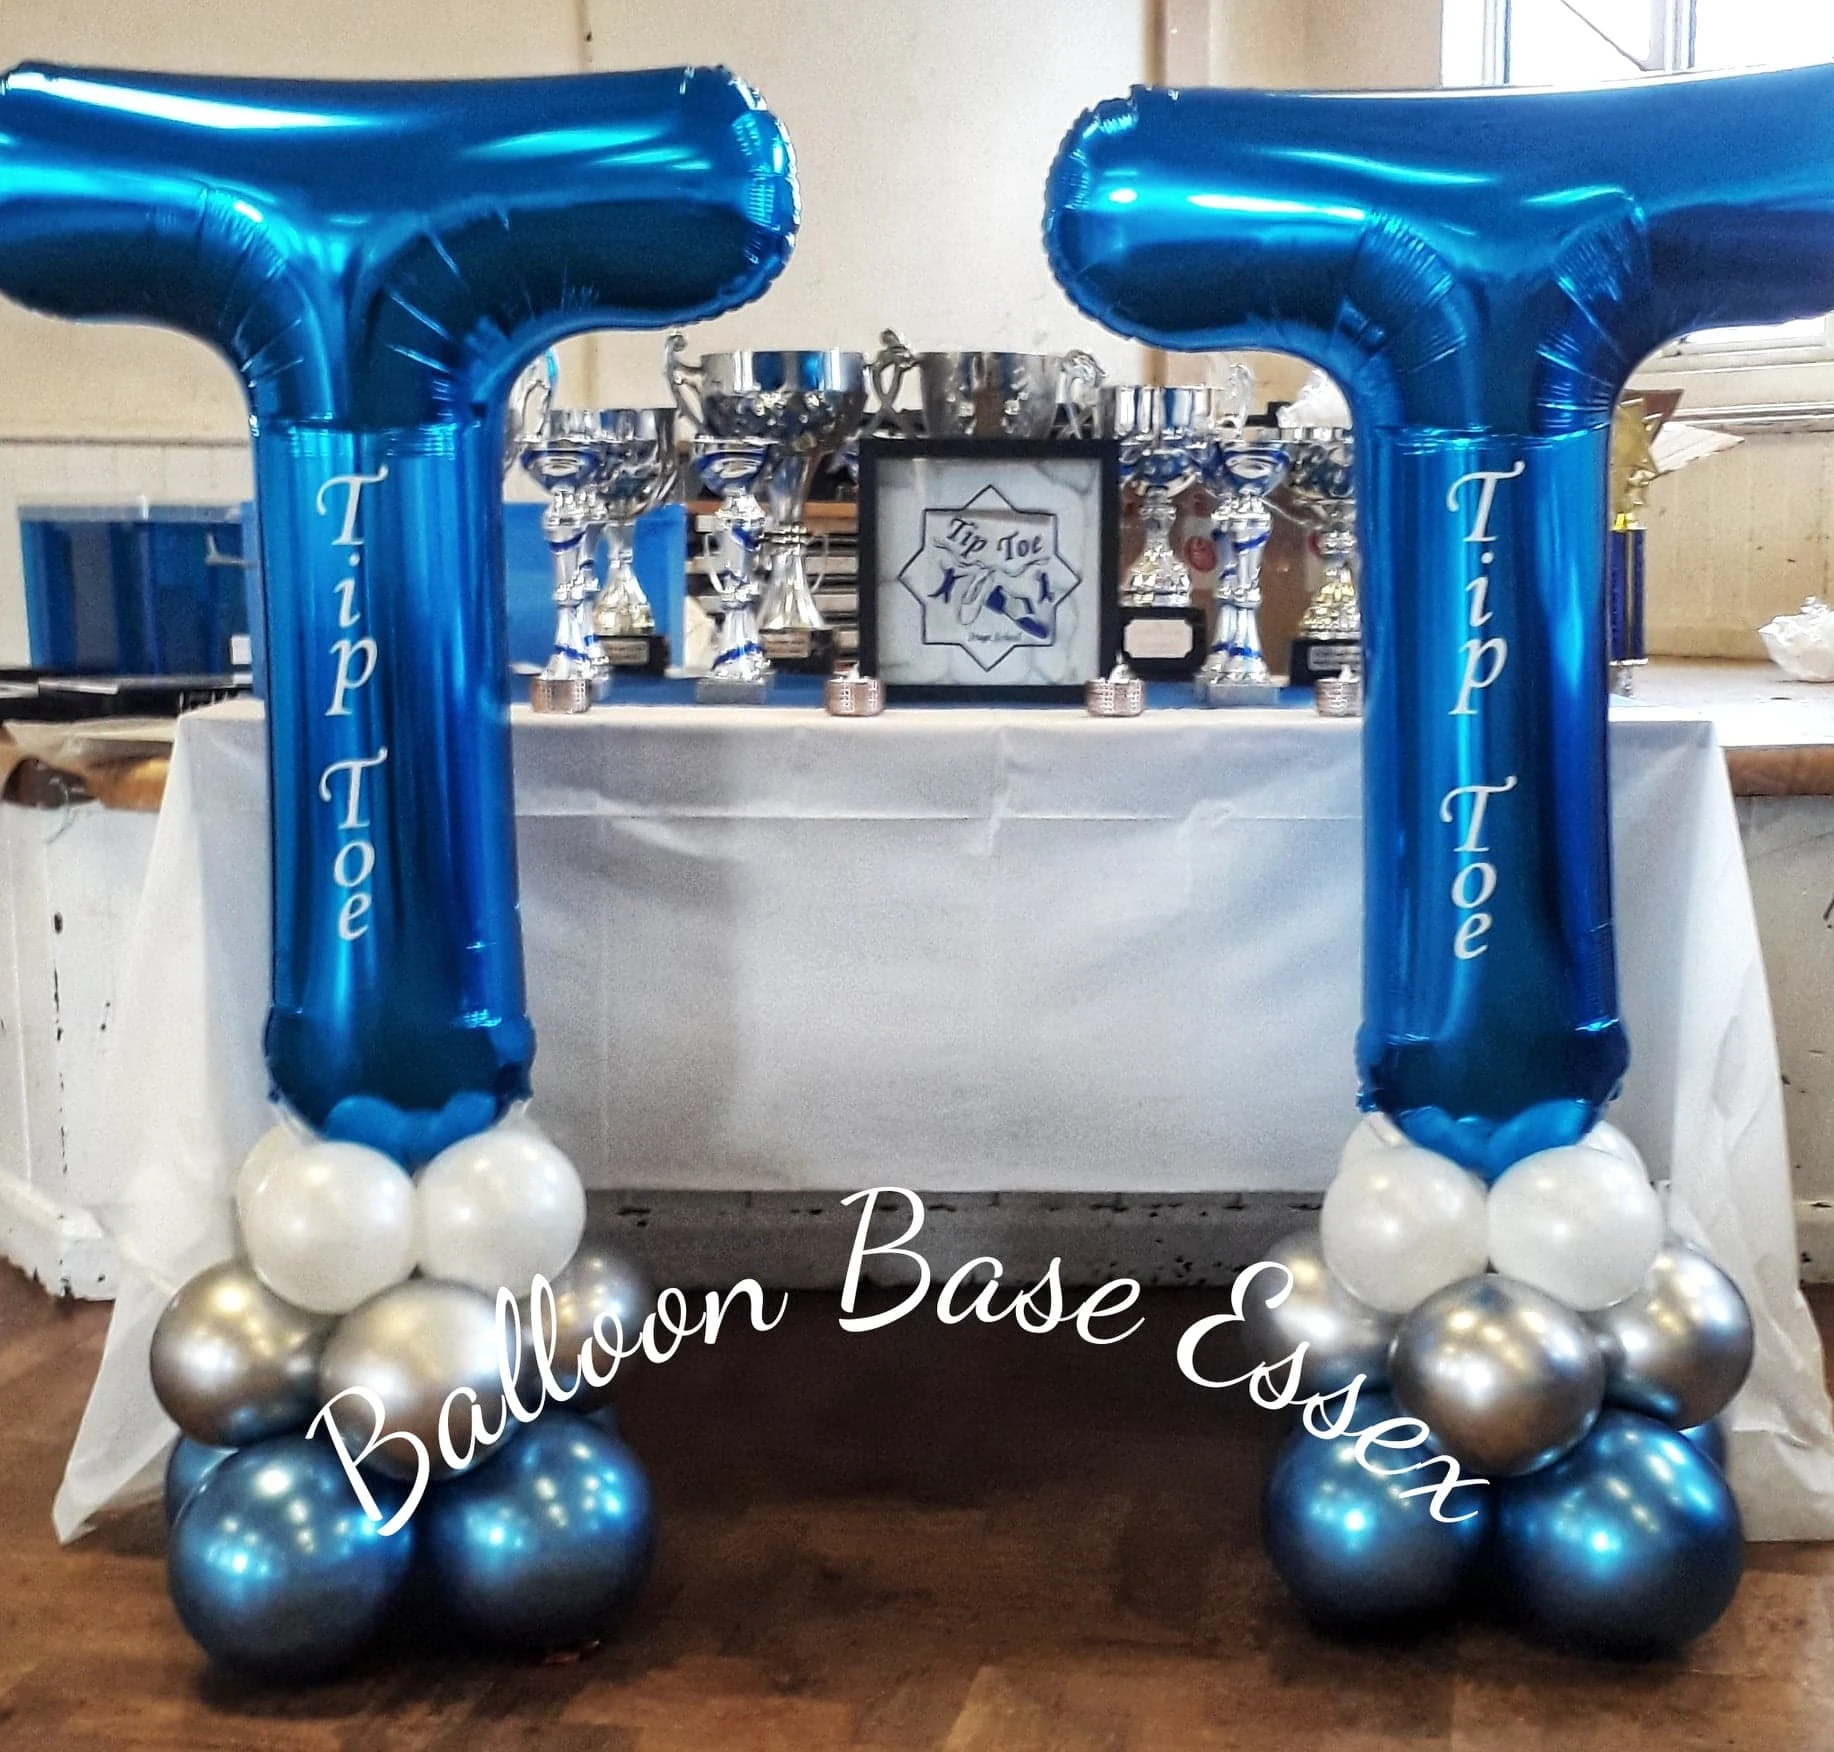 Large blue letter balloons for an awards ceremony